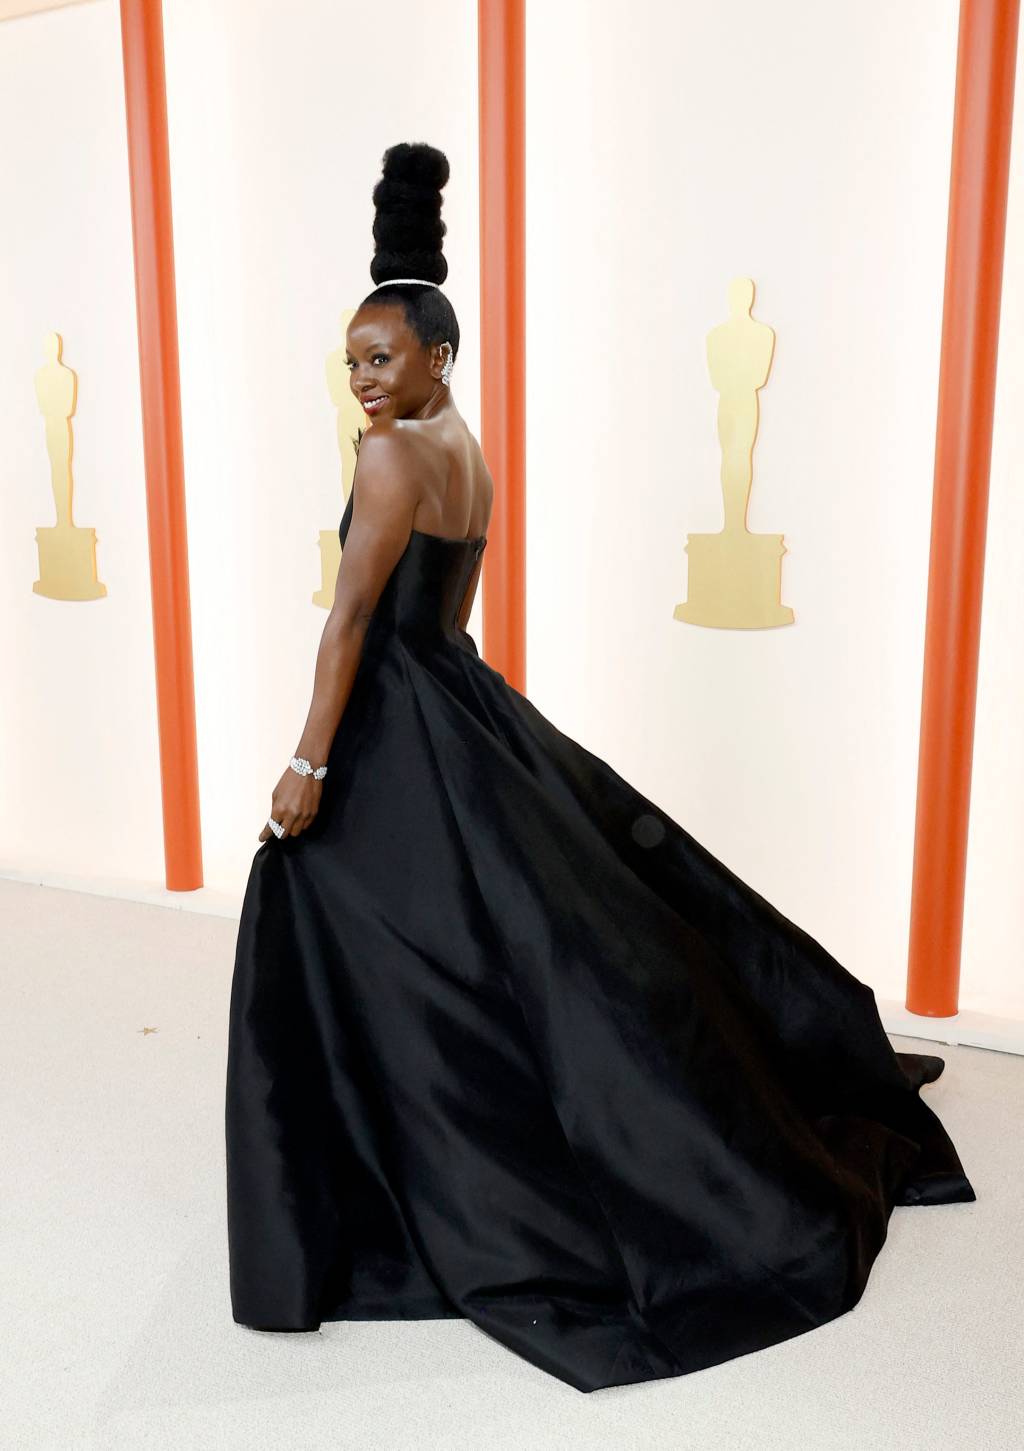 HOLLYWOOD, CALIFORNIA - MARCH 12: Danai Gurira attends the 95th Annual Academy Awards on March 12, 2023 in Hollywood, California. Mike Coppola/Getty Images/AFP (Photo by Mike Coppola / GETTY IMAGES NORTH AMERICA / Getty Images via AFP)